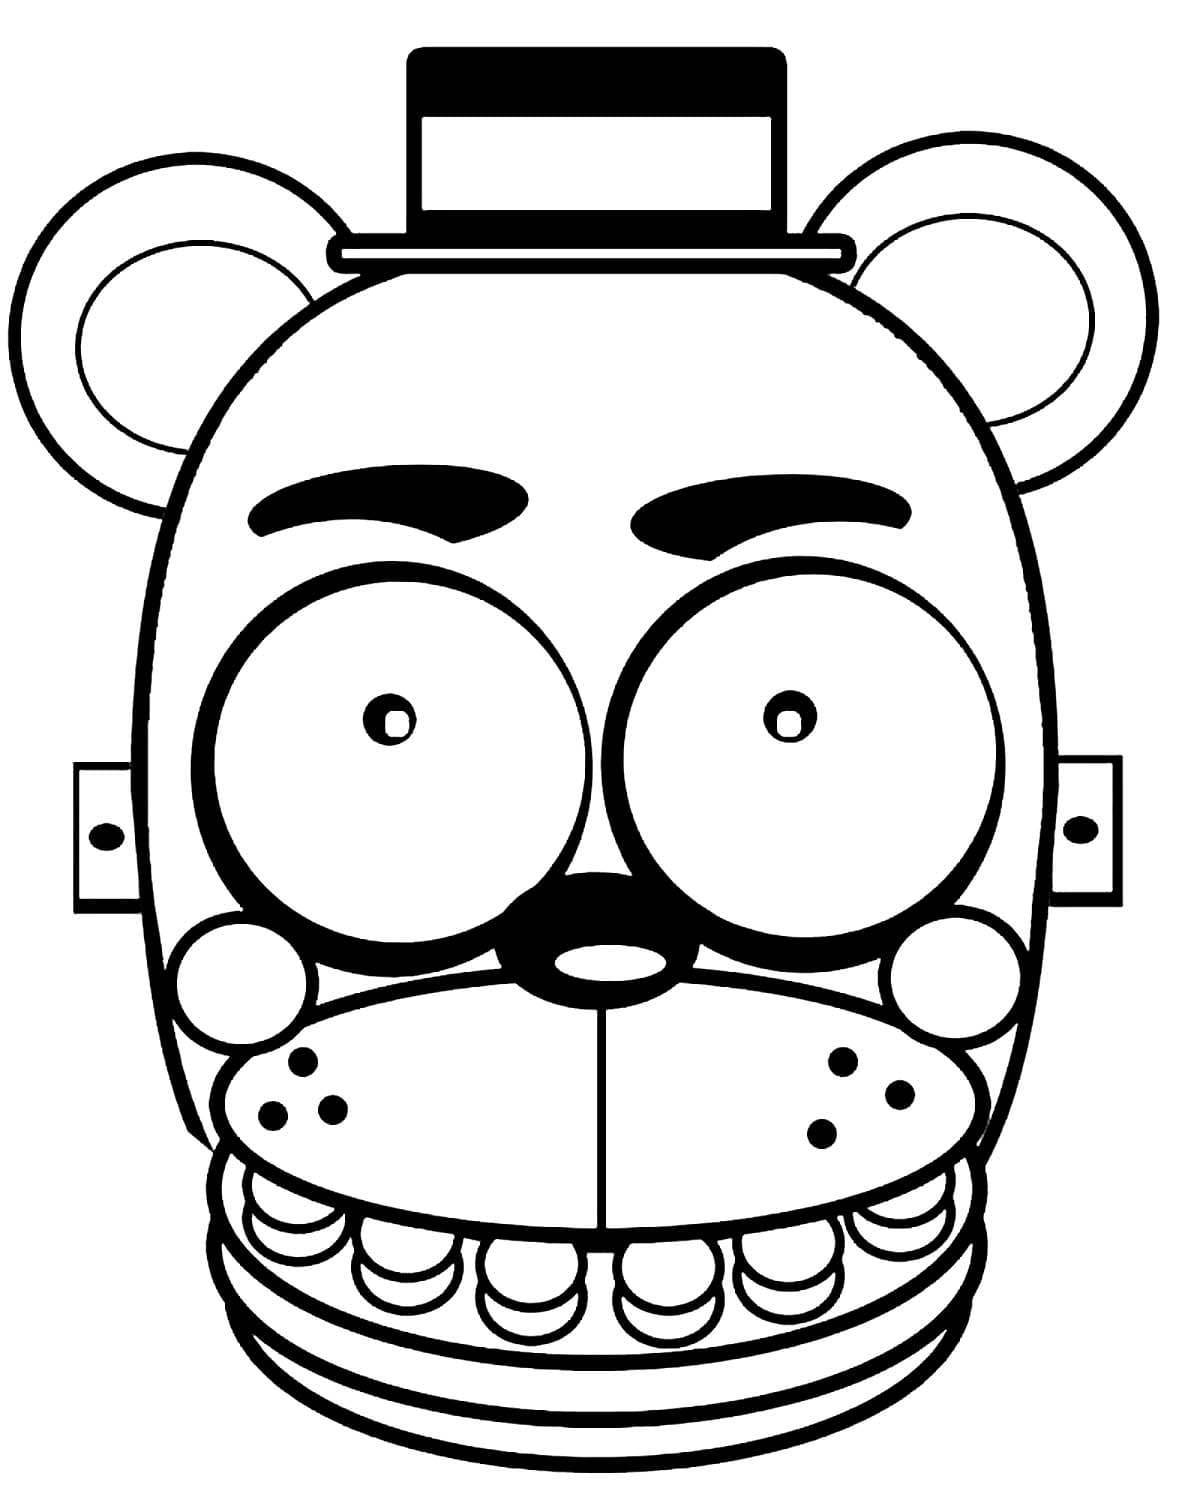 Freddy's exciting animatronic coloring book